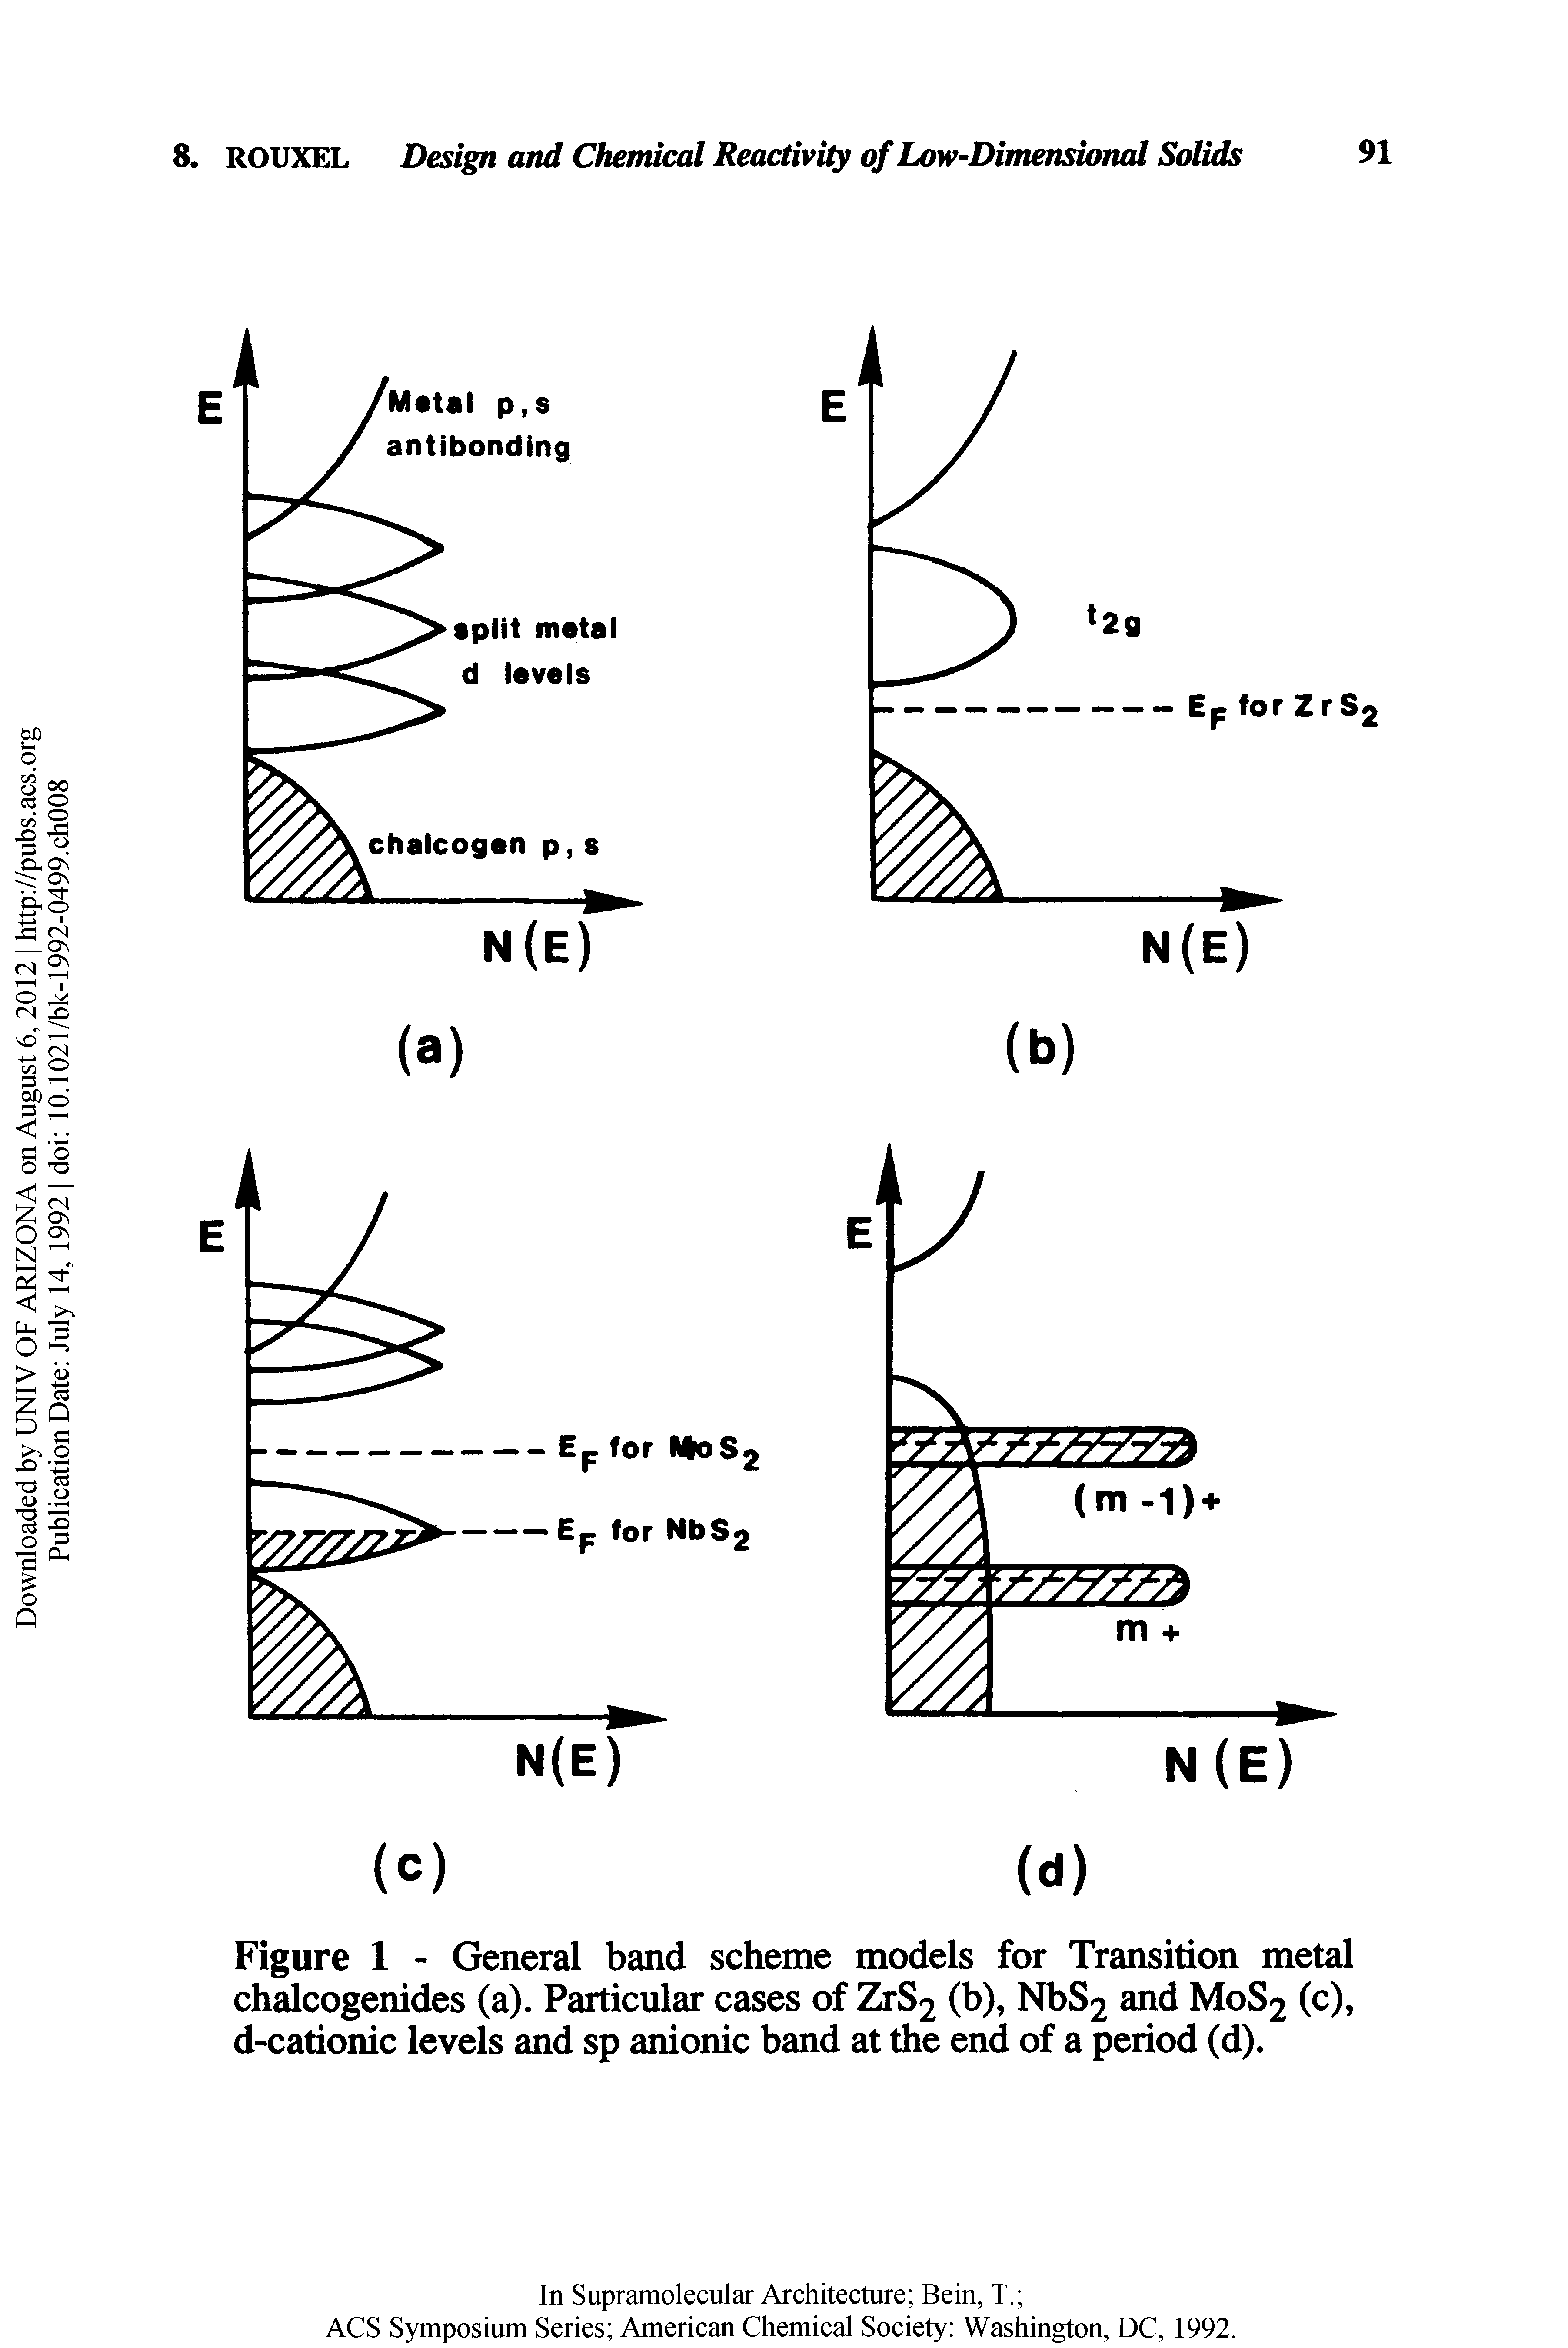 Figure 1 - General band scheme models for Transition metal chalcogenides (a). Particular cases of ZrS2 (b), NbS2 and M0S2 (c), d-cationic levels and sp anionic band at the end of a period (d).